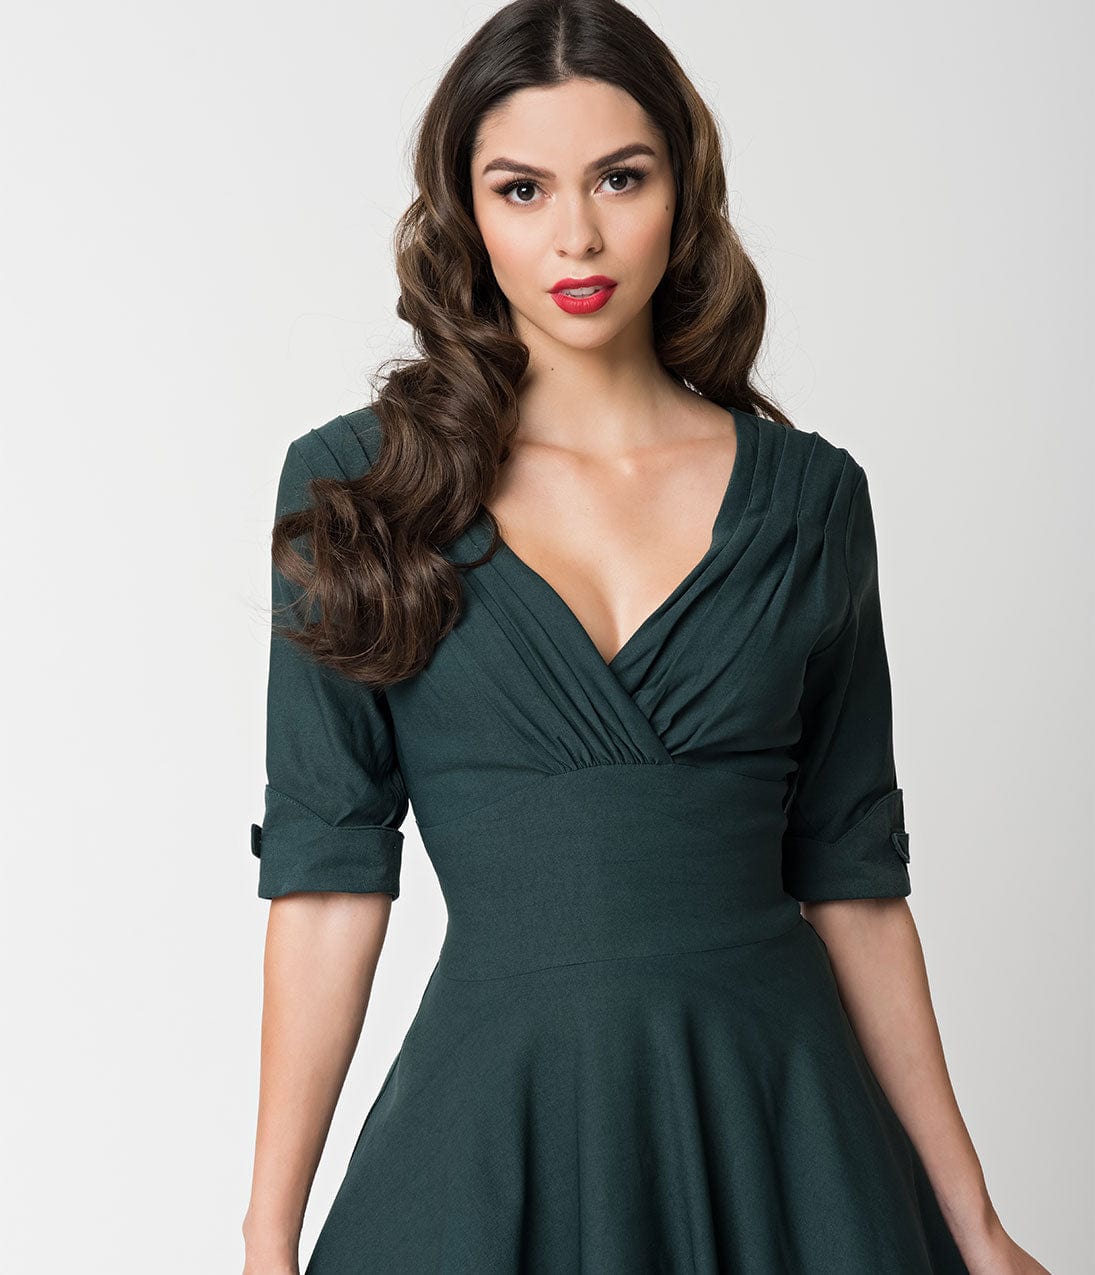 Unique Vintage 1950s Dark Green Delores Swing Dress with Sleeves